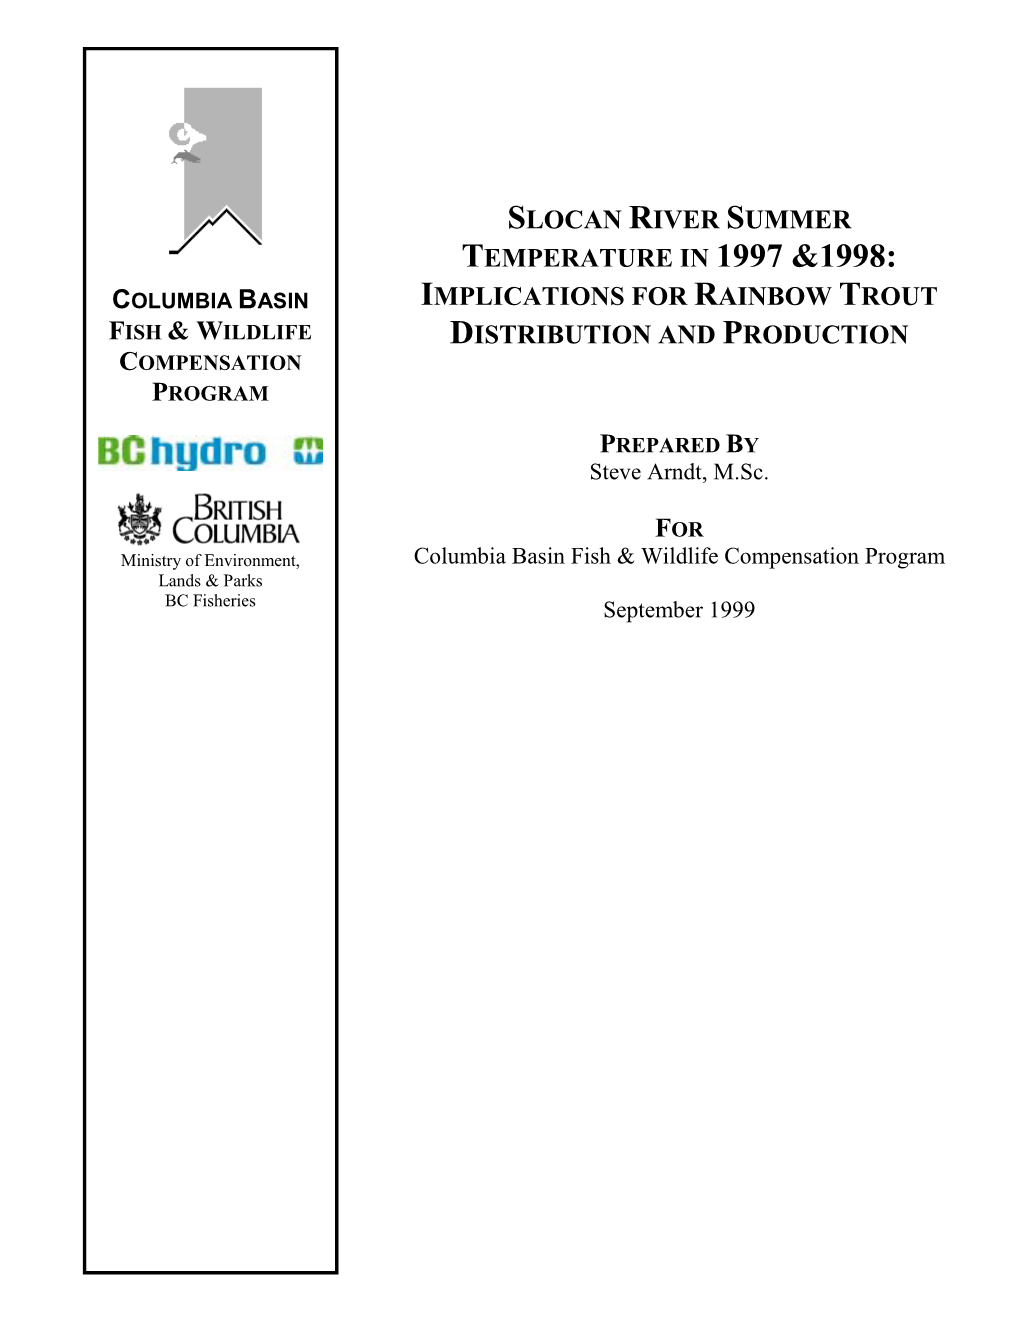 Slocan River Summer Temperature in 1997 &1998: Columbia Basin Implications for Rainbow Trout Fish & Wildlife Distribution and Production Compensation Program